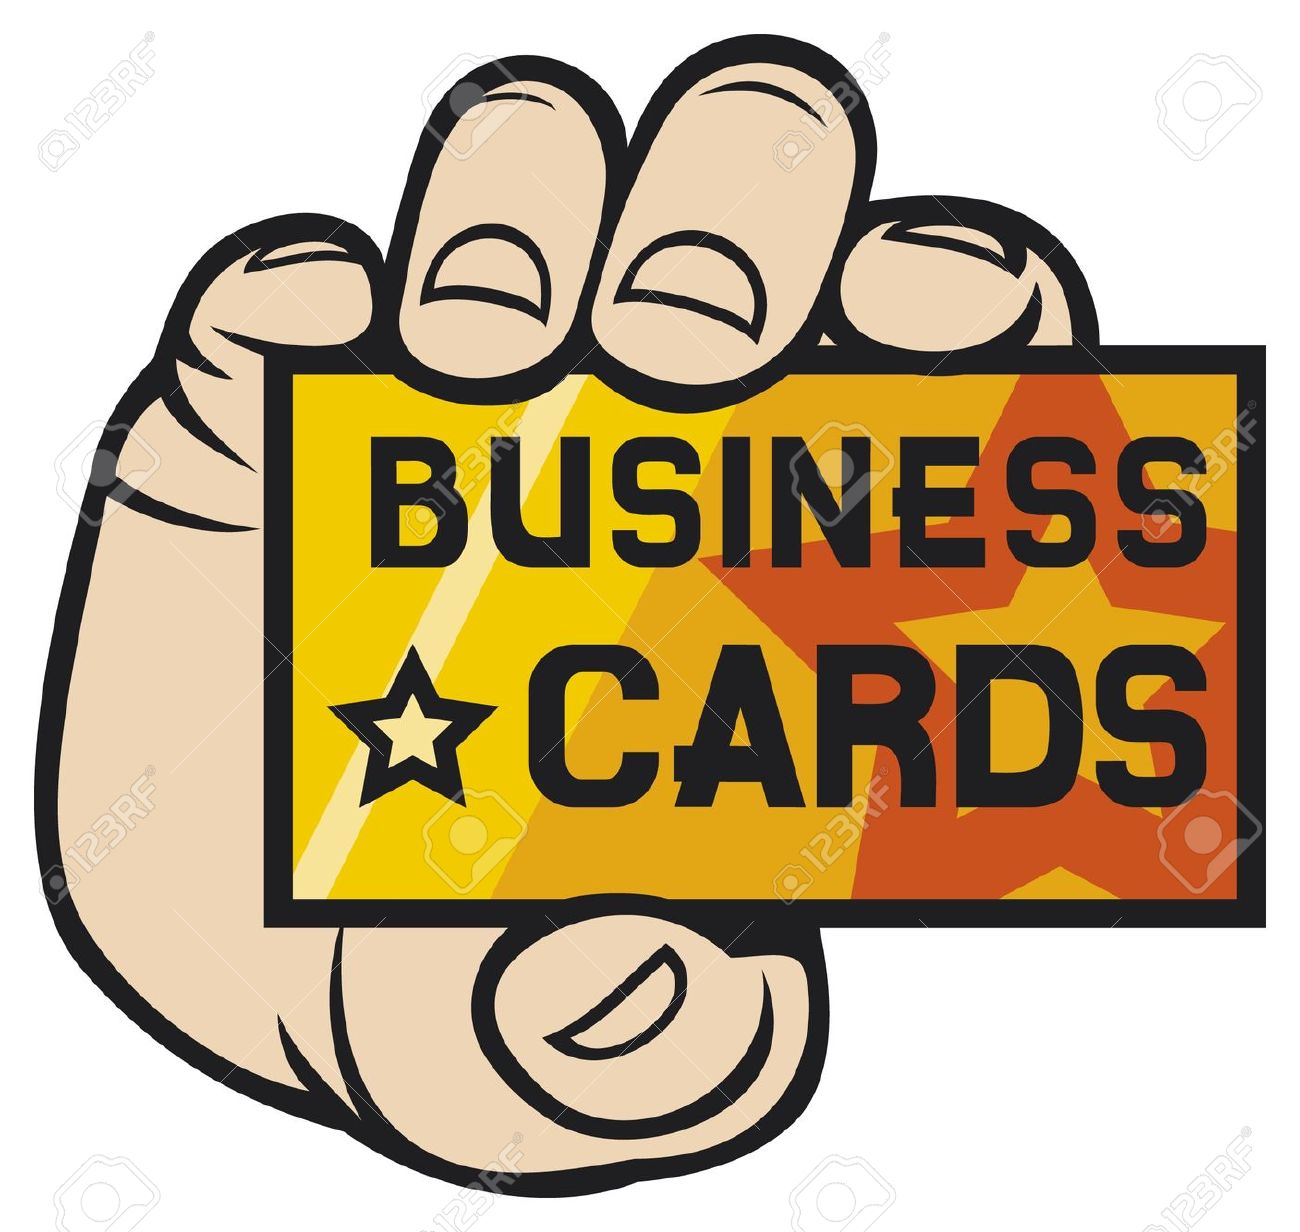 Business Card Has A Chance To